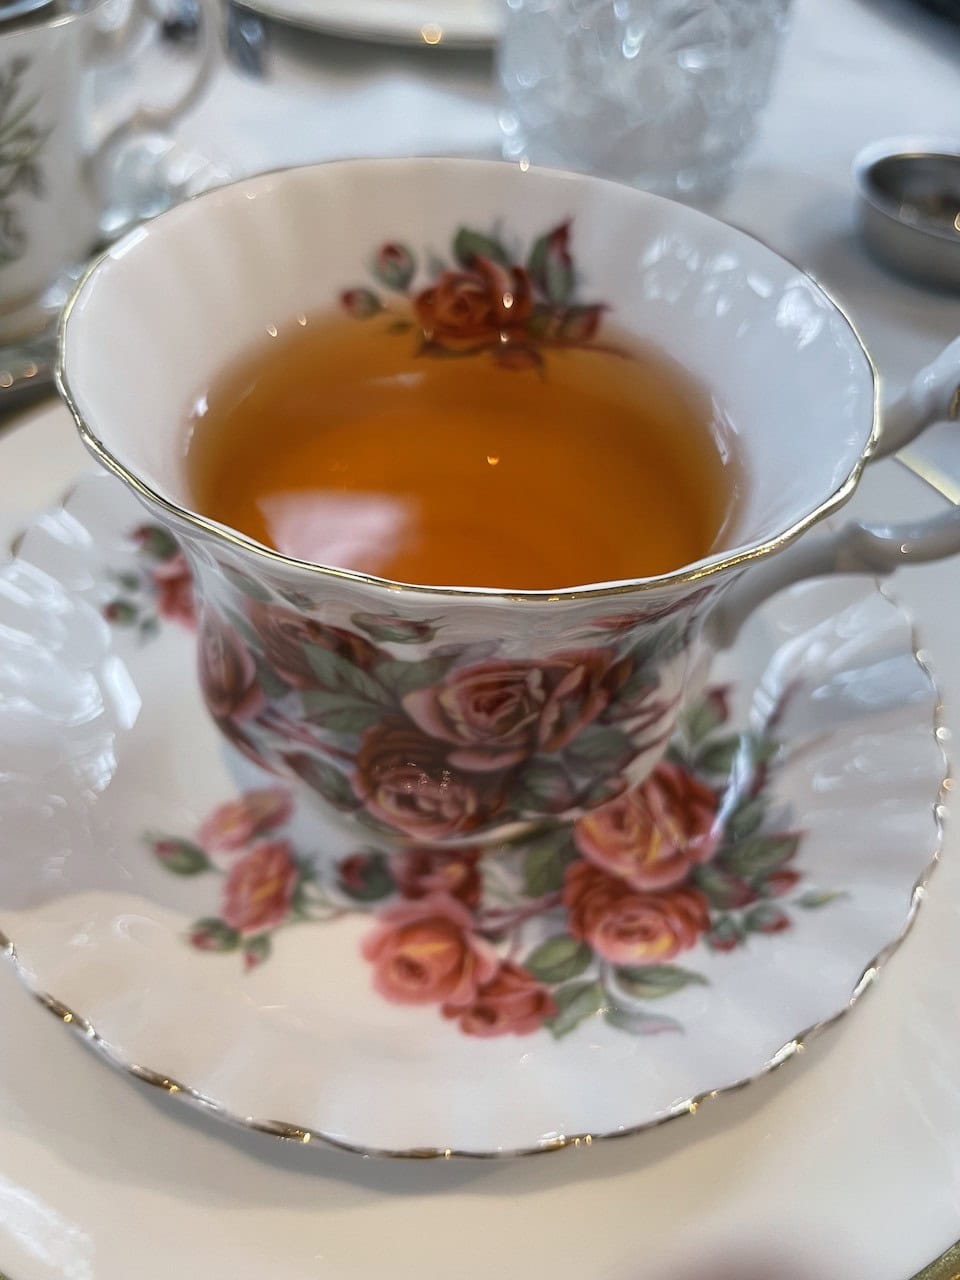 Tea Cup and Saucer with Tea - I ordered my favourite tea, Cream of Earl Grey, at the Golden Teapot Tearoom in Brantford, Ontario, Canada.